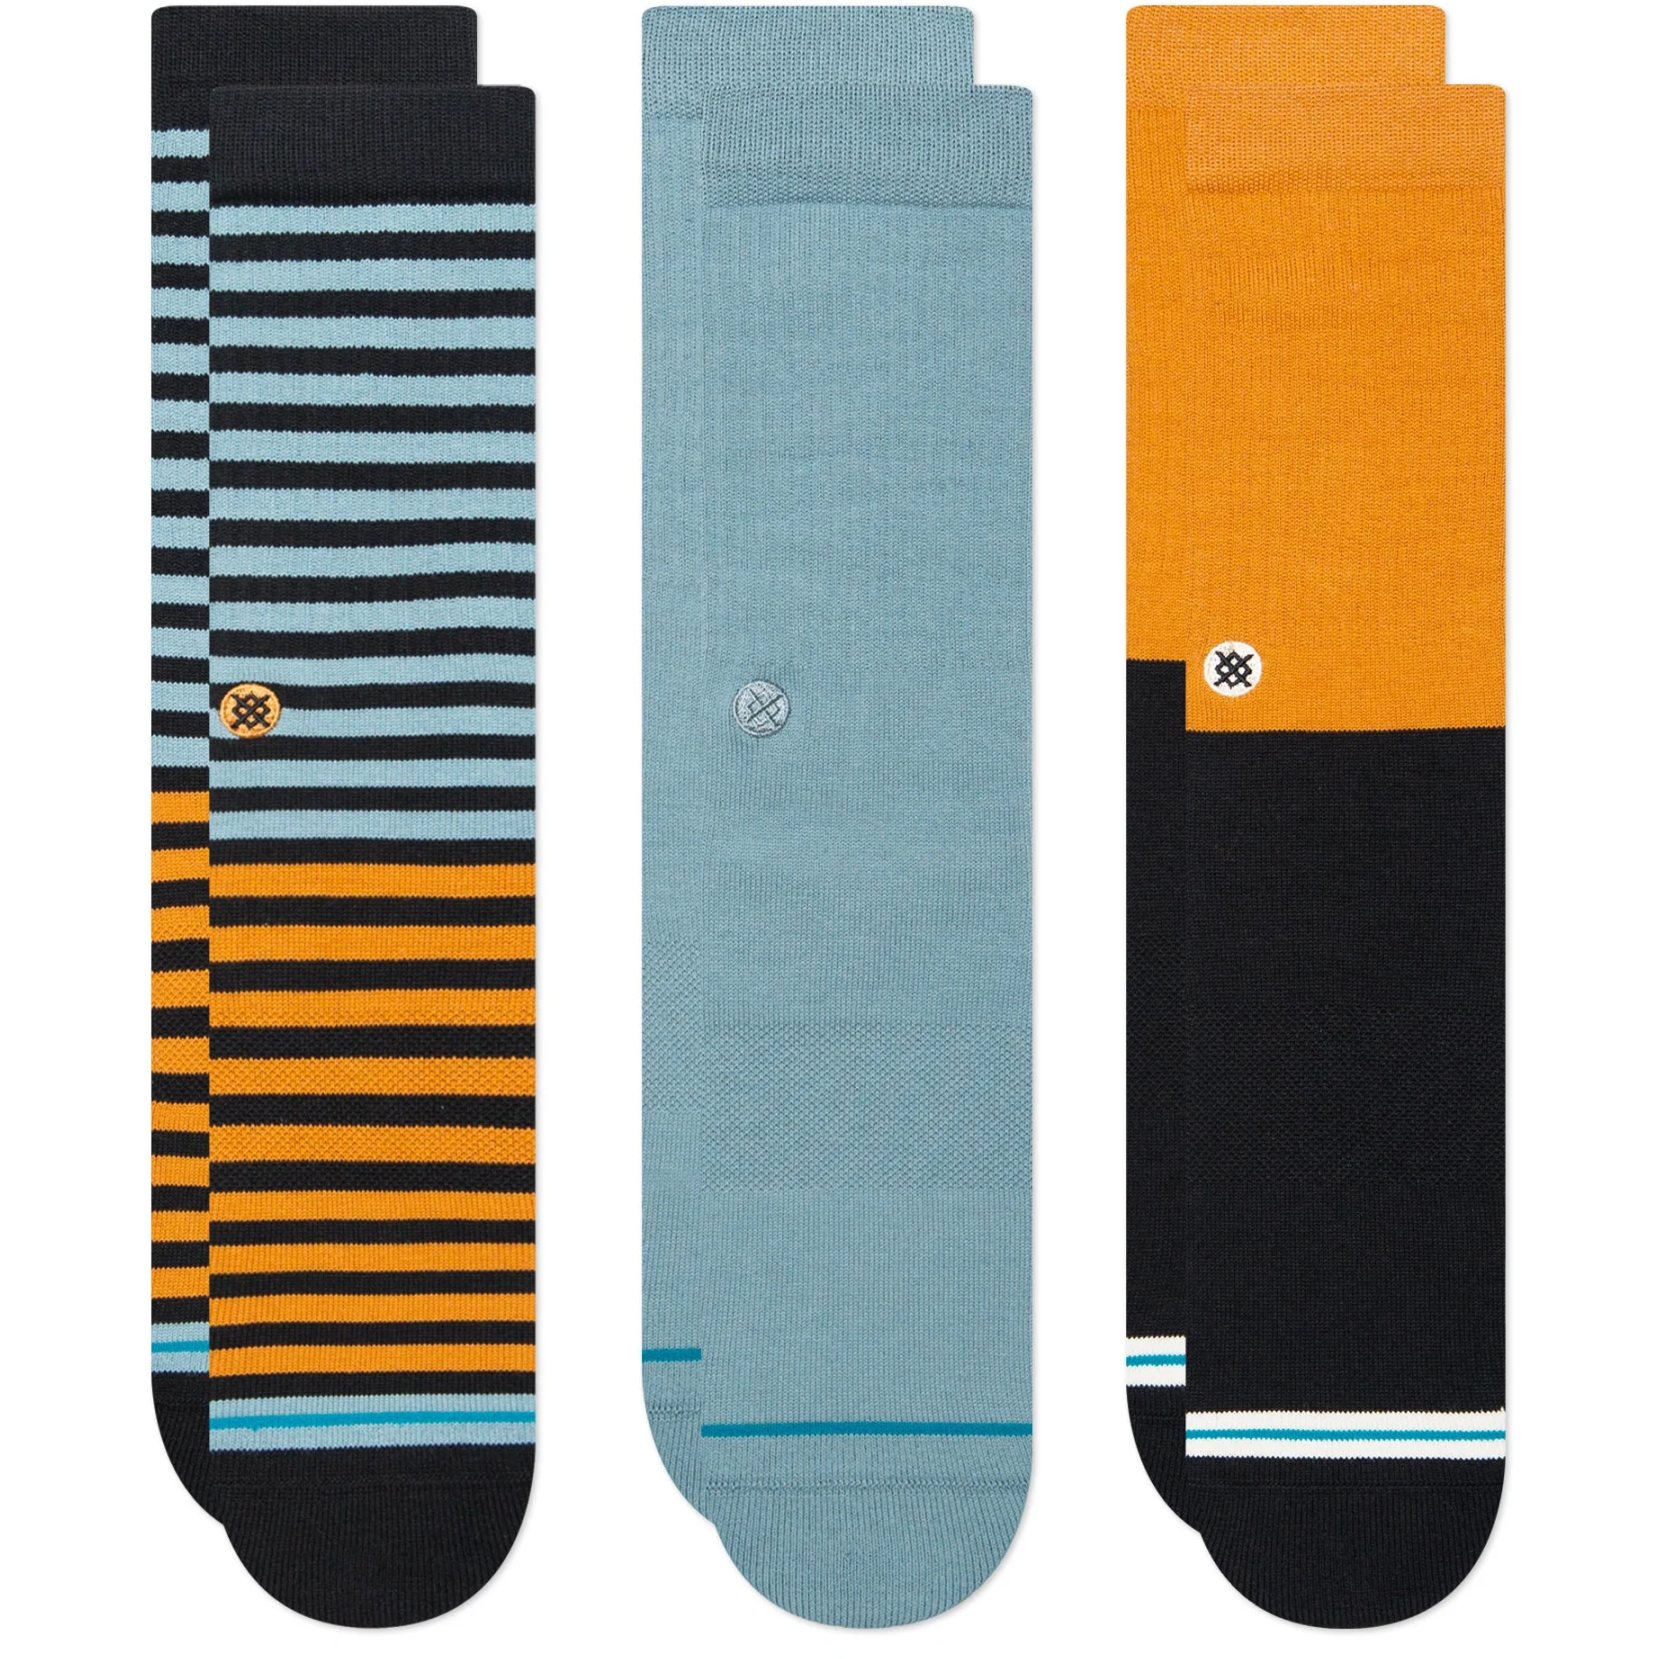 Picture of Stance Barnacle 3 Pack Socks - multi